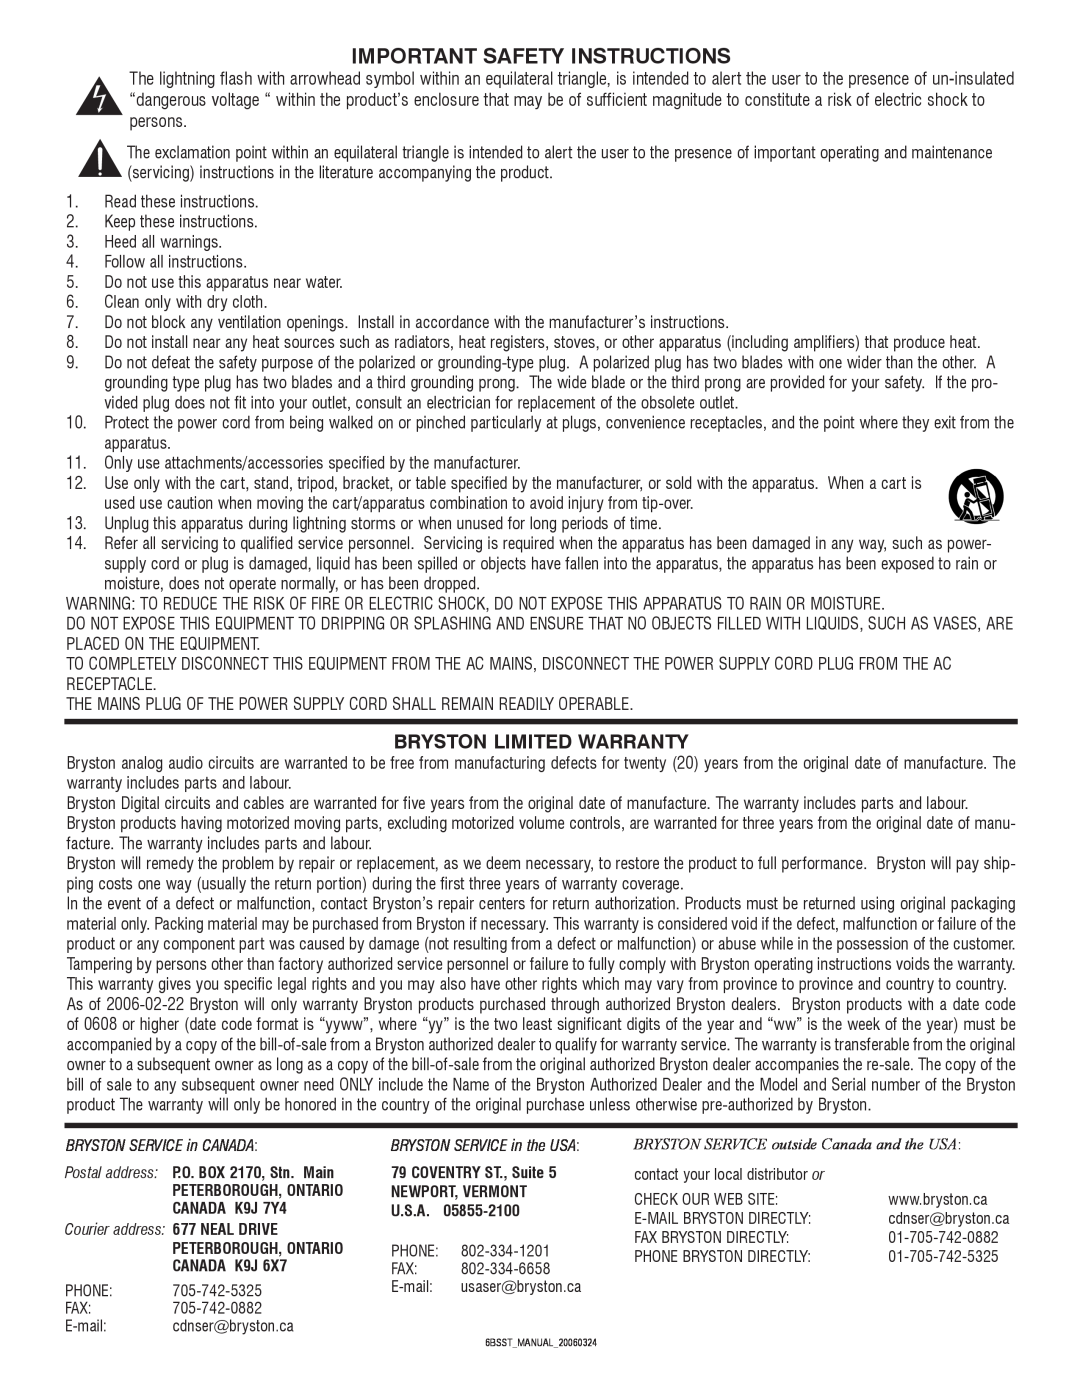 Bryston 6B SST owner manual Important Safety Instructions, Bryston Limited Warranty 